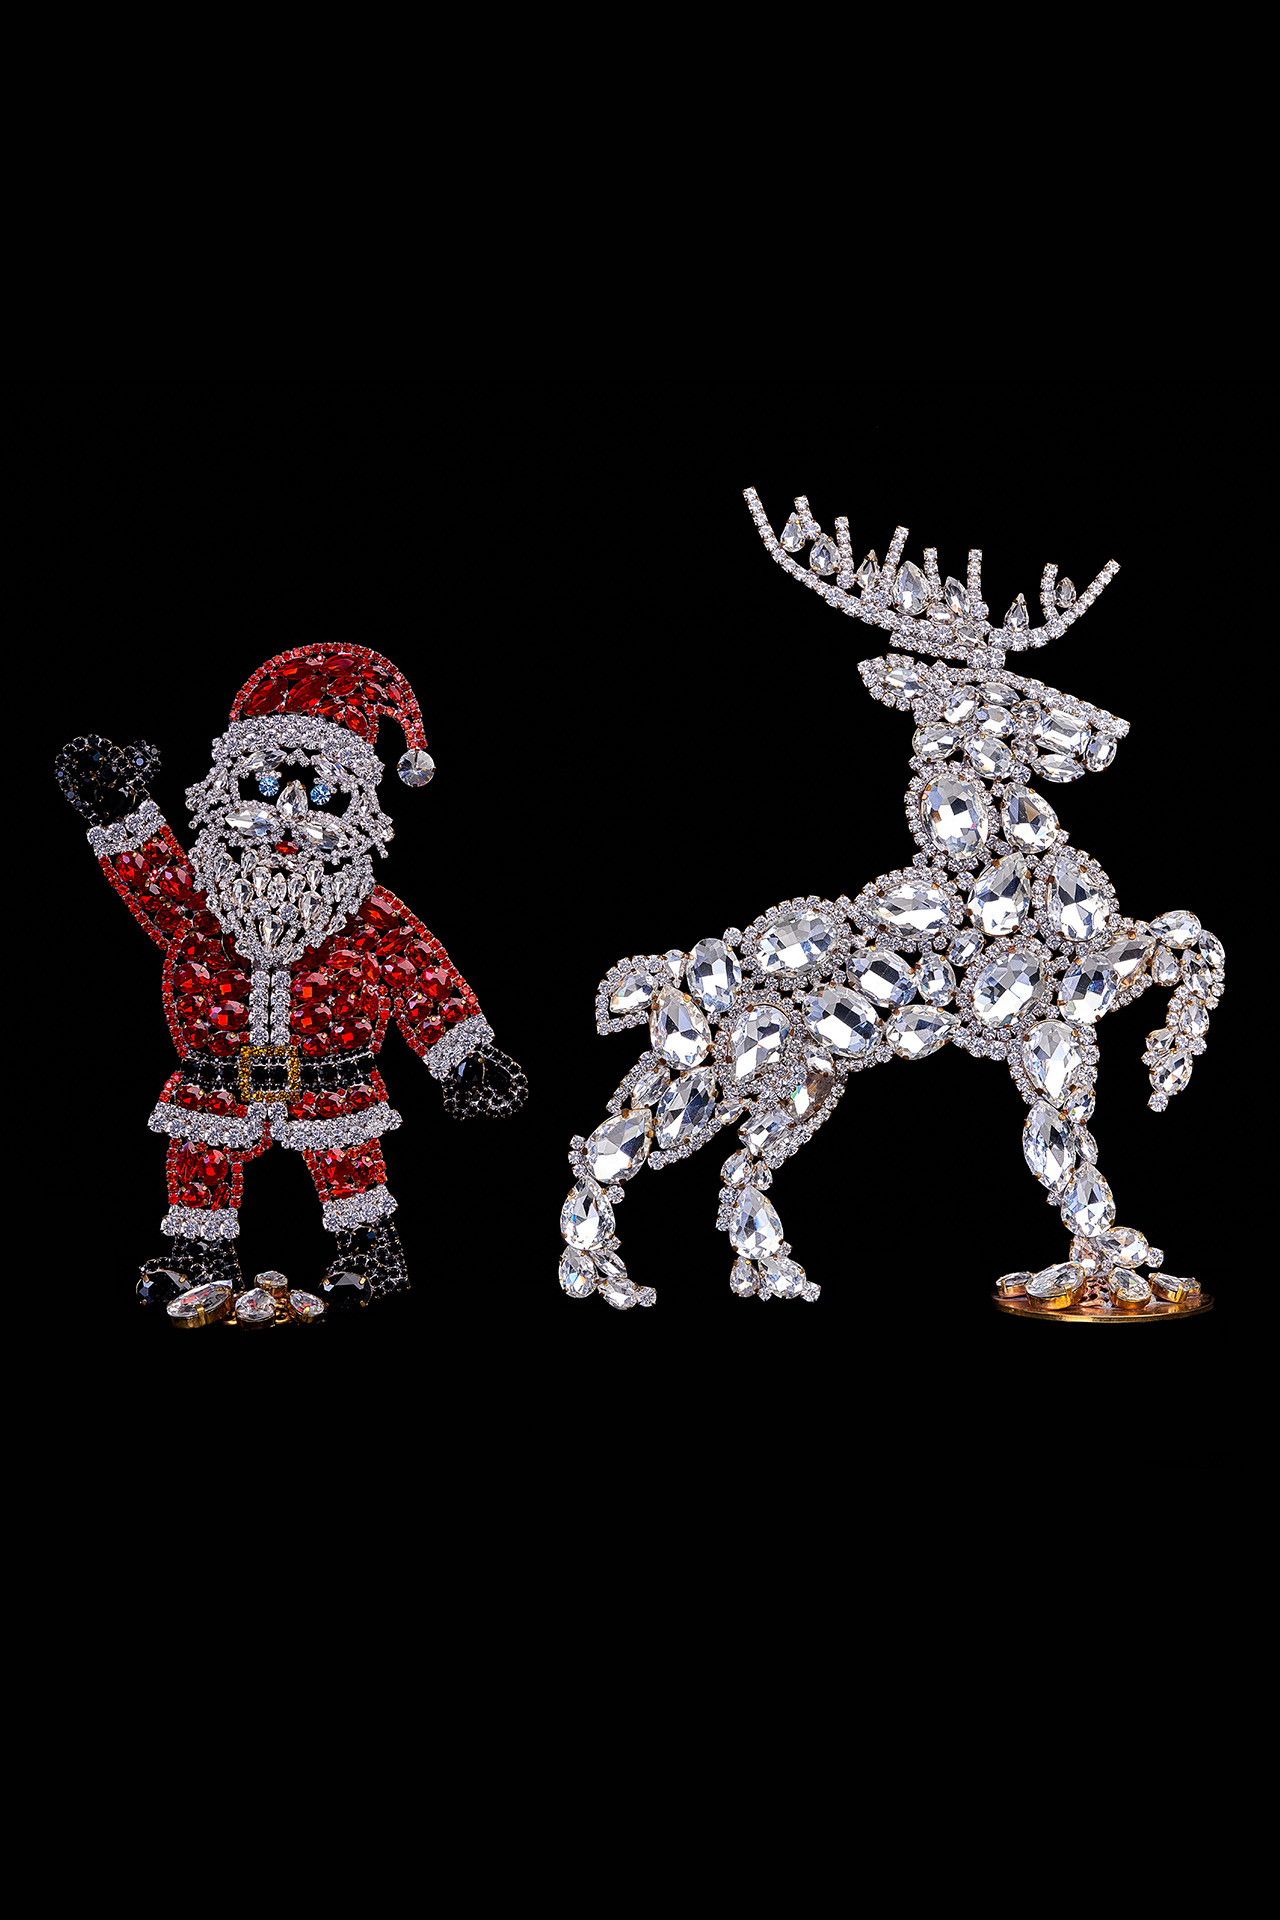 Handcrafted Christmas decoration of Santa Claus and valiant reindeer